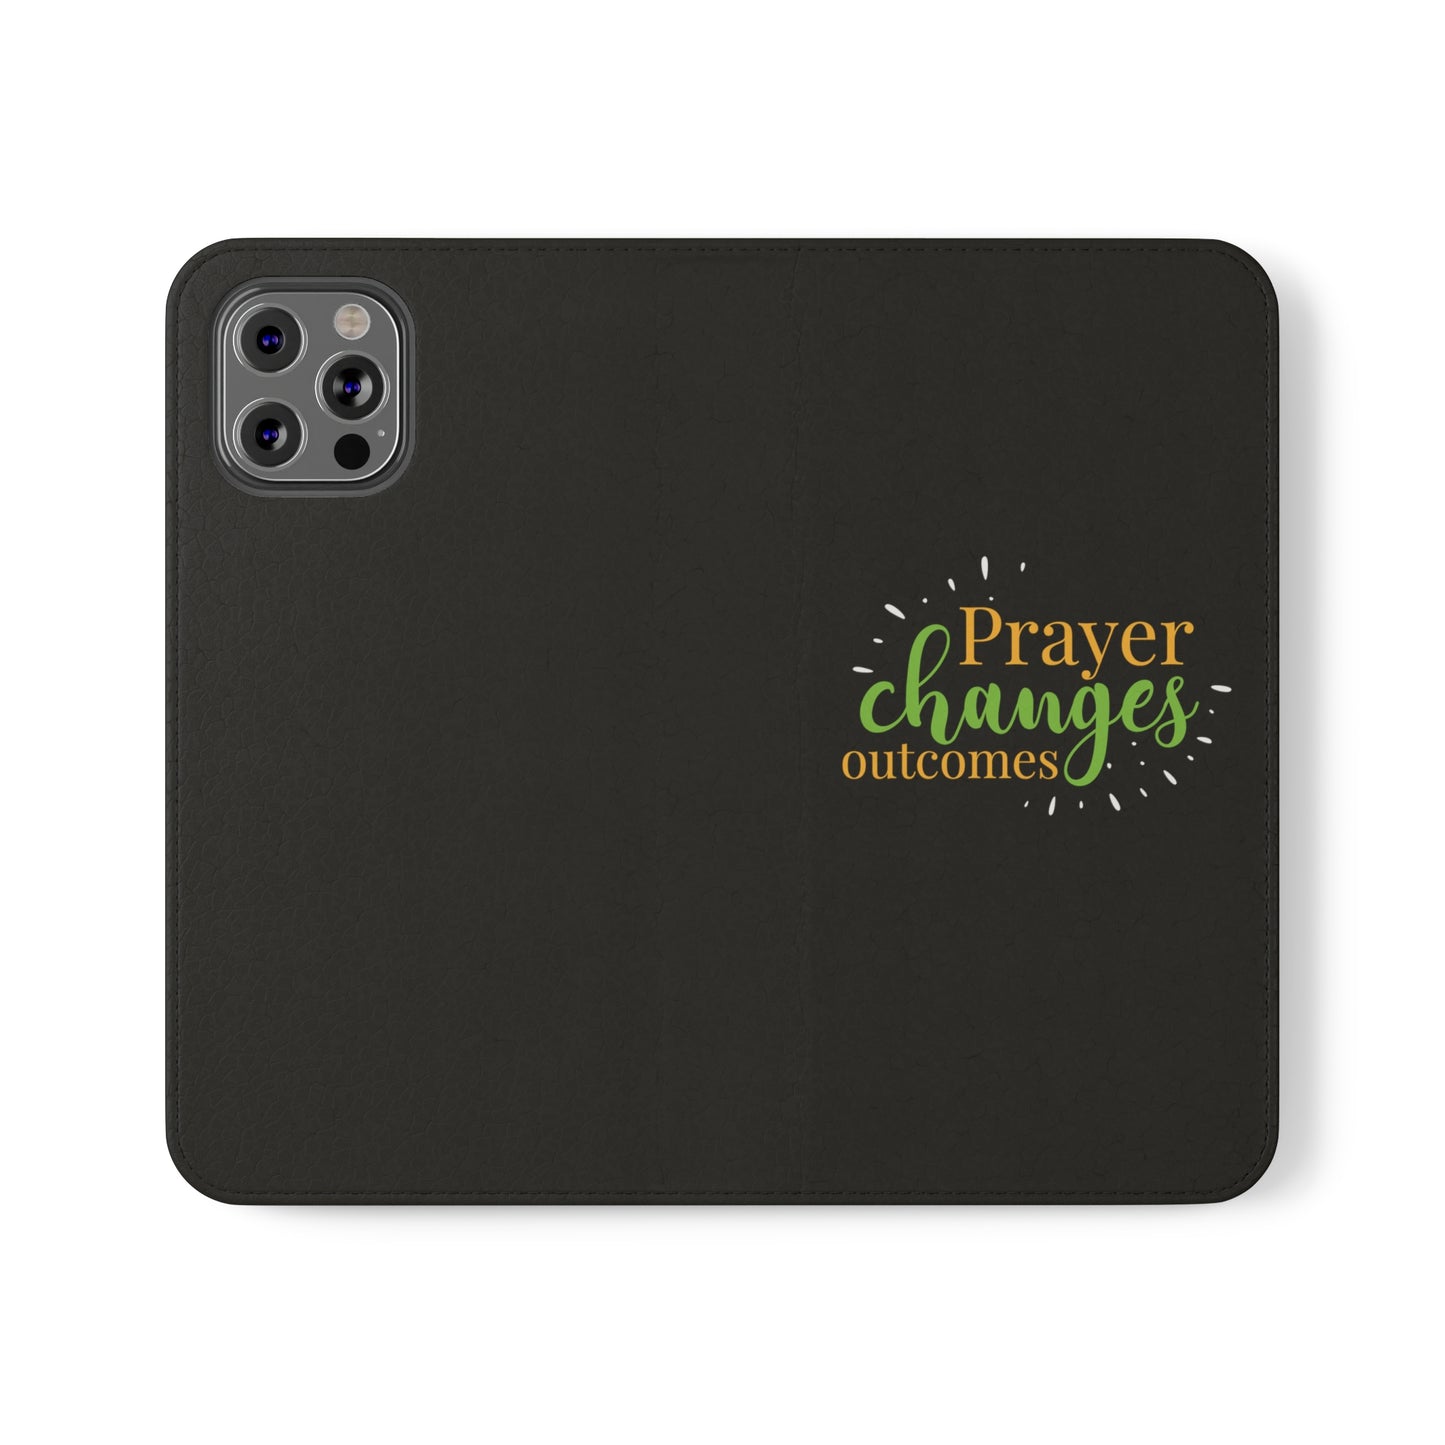 Prayer Changes Outcomes Phone Flip Cases